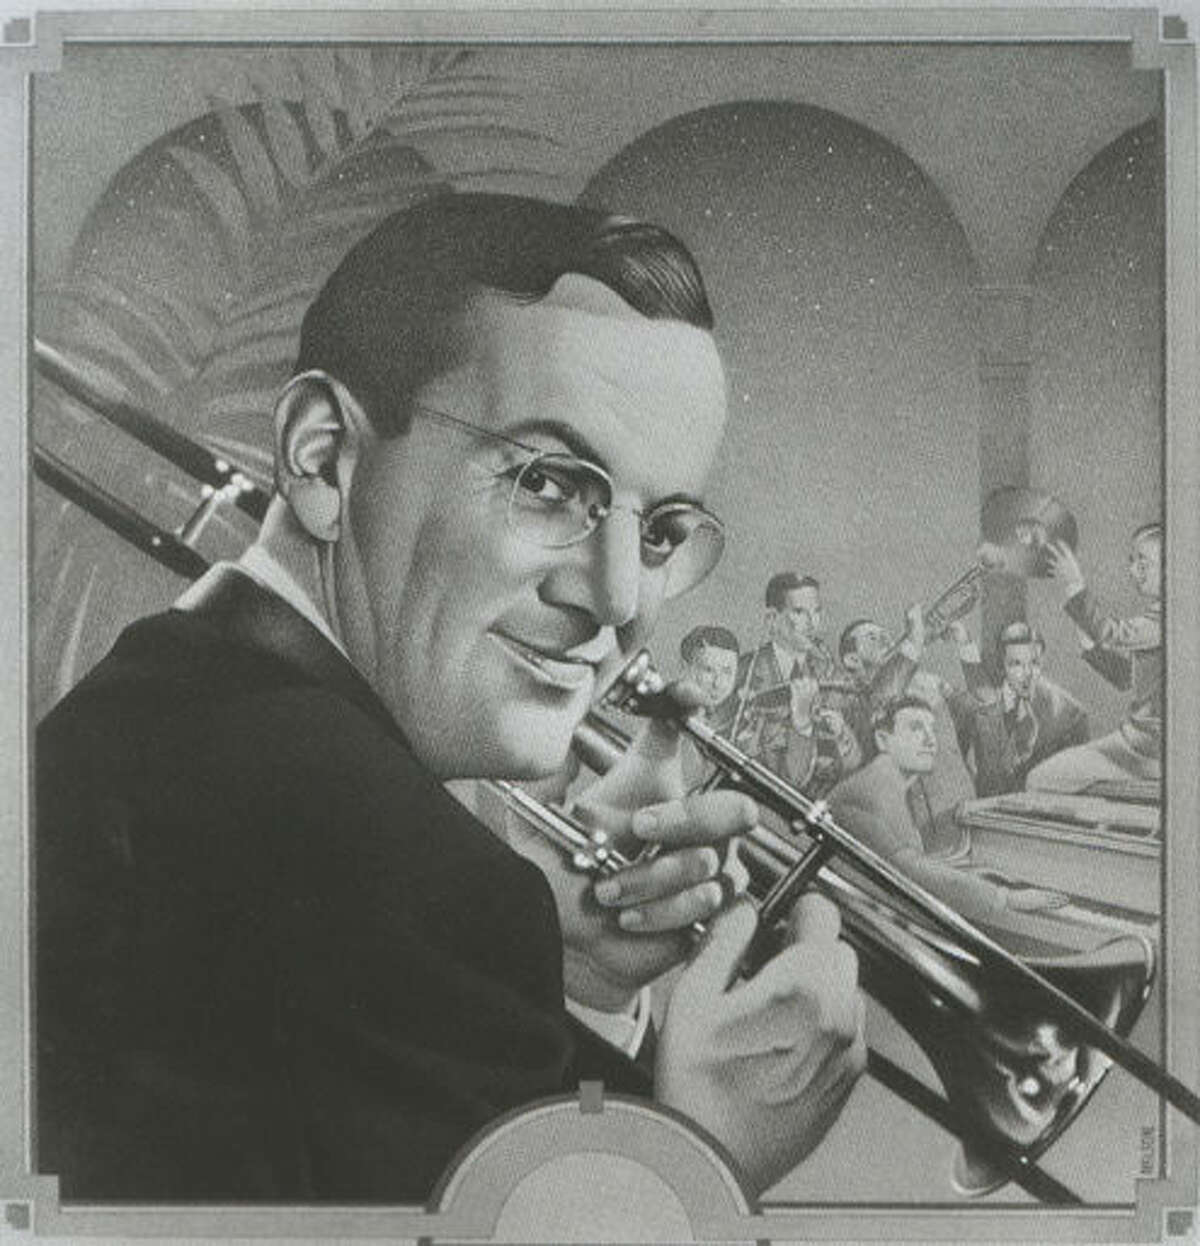 Glenn Miller - 1904-1944. His musical legacy lives on with the Glenn Miller Orchestra, which will perform Feb. 18 at the historic Granada Theatre in downtown Plainview.